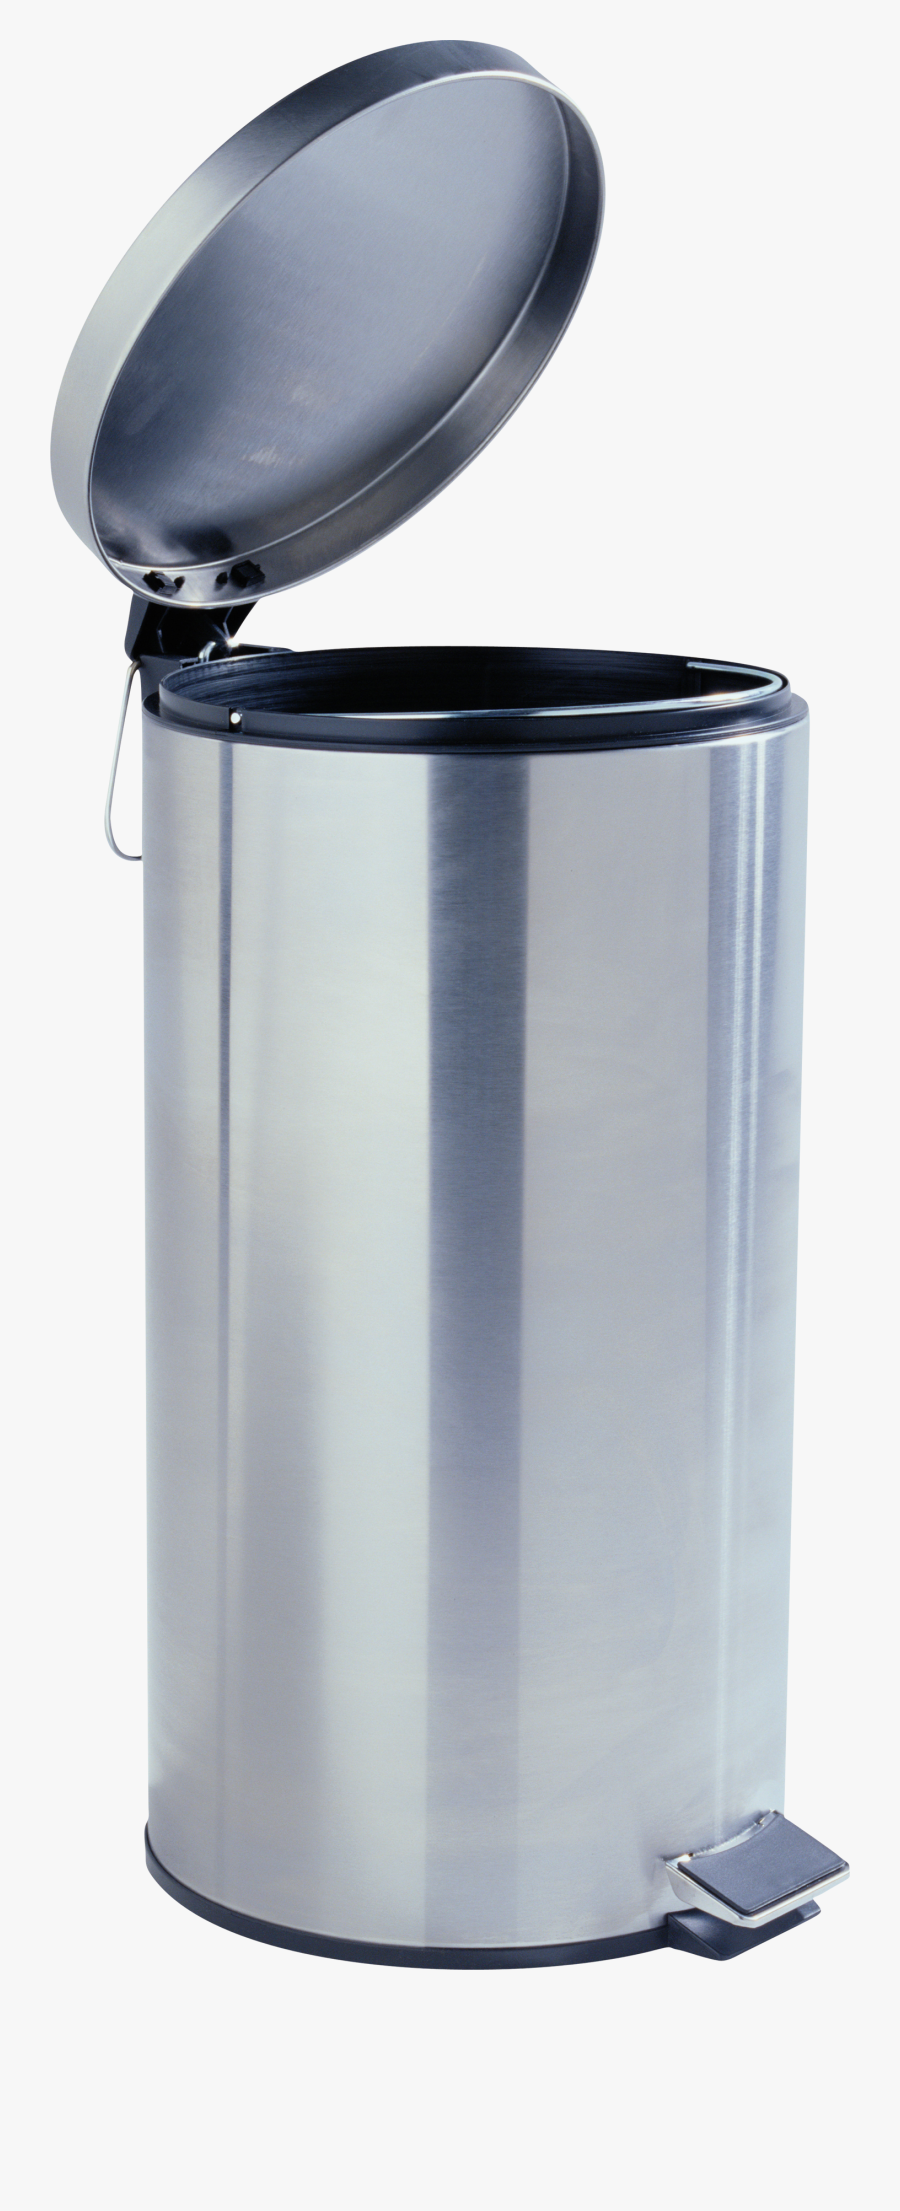 Waste Container Icon Computer File - Kitchen Trash Can Transparent, Transparent Clipart